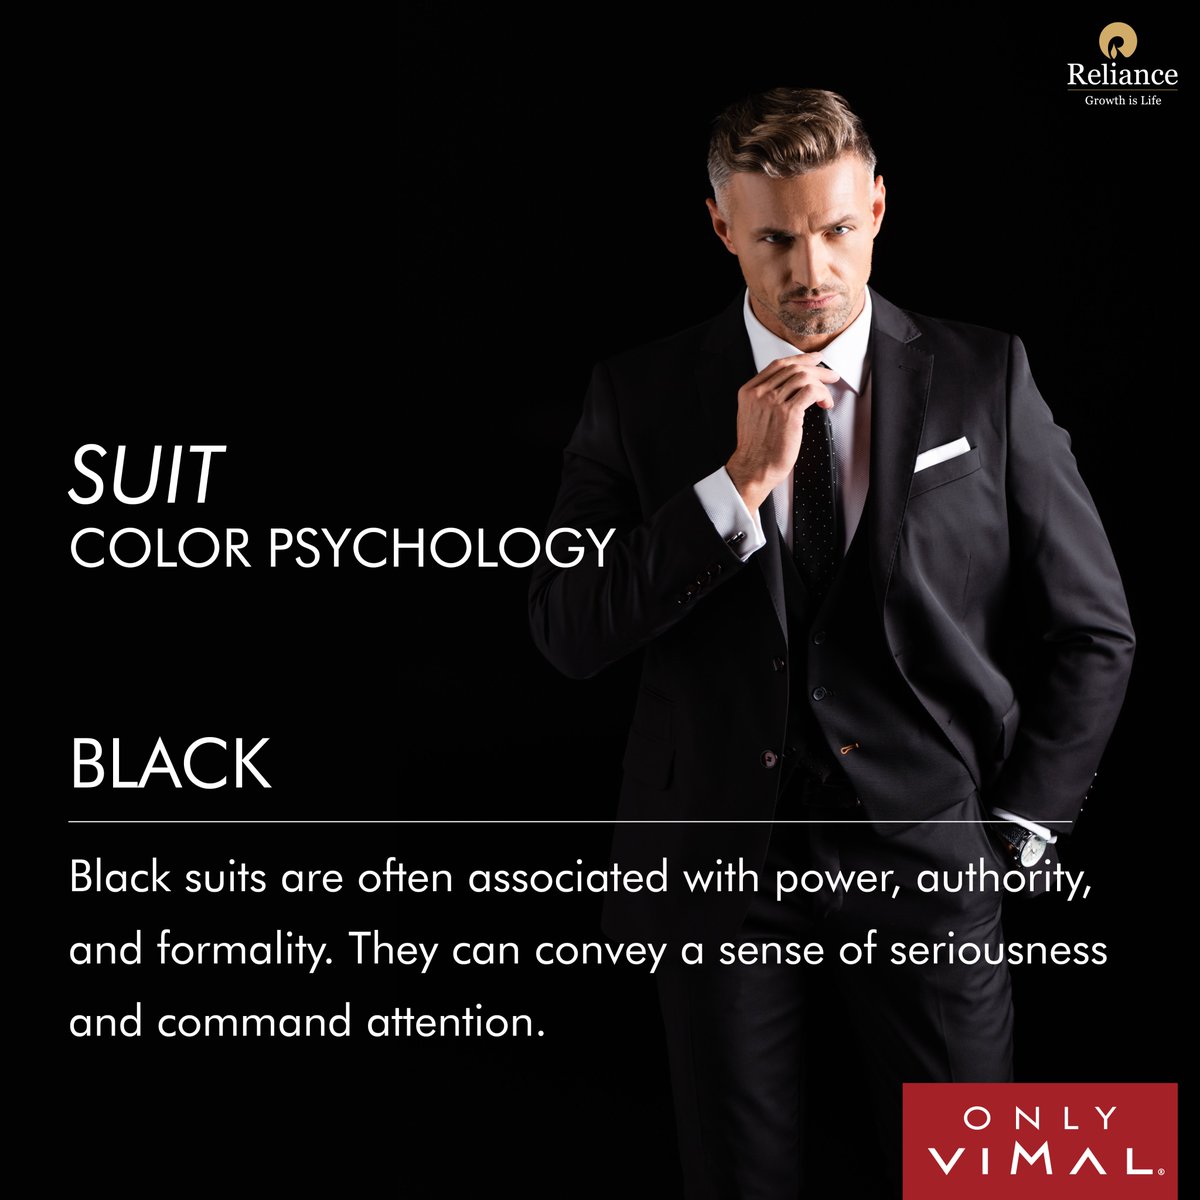 Dressed in Power: The Psychology Behind Black Suits #ColorPsychology #BlackSuits #PowerMoves #OnlyVimal #Reliance #RelianceIndustries #RelianceTextiles